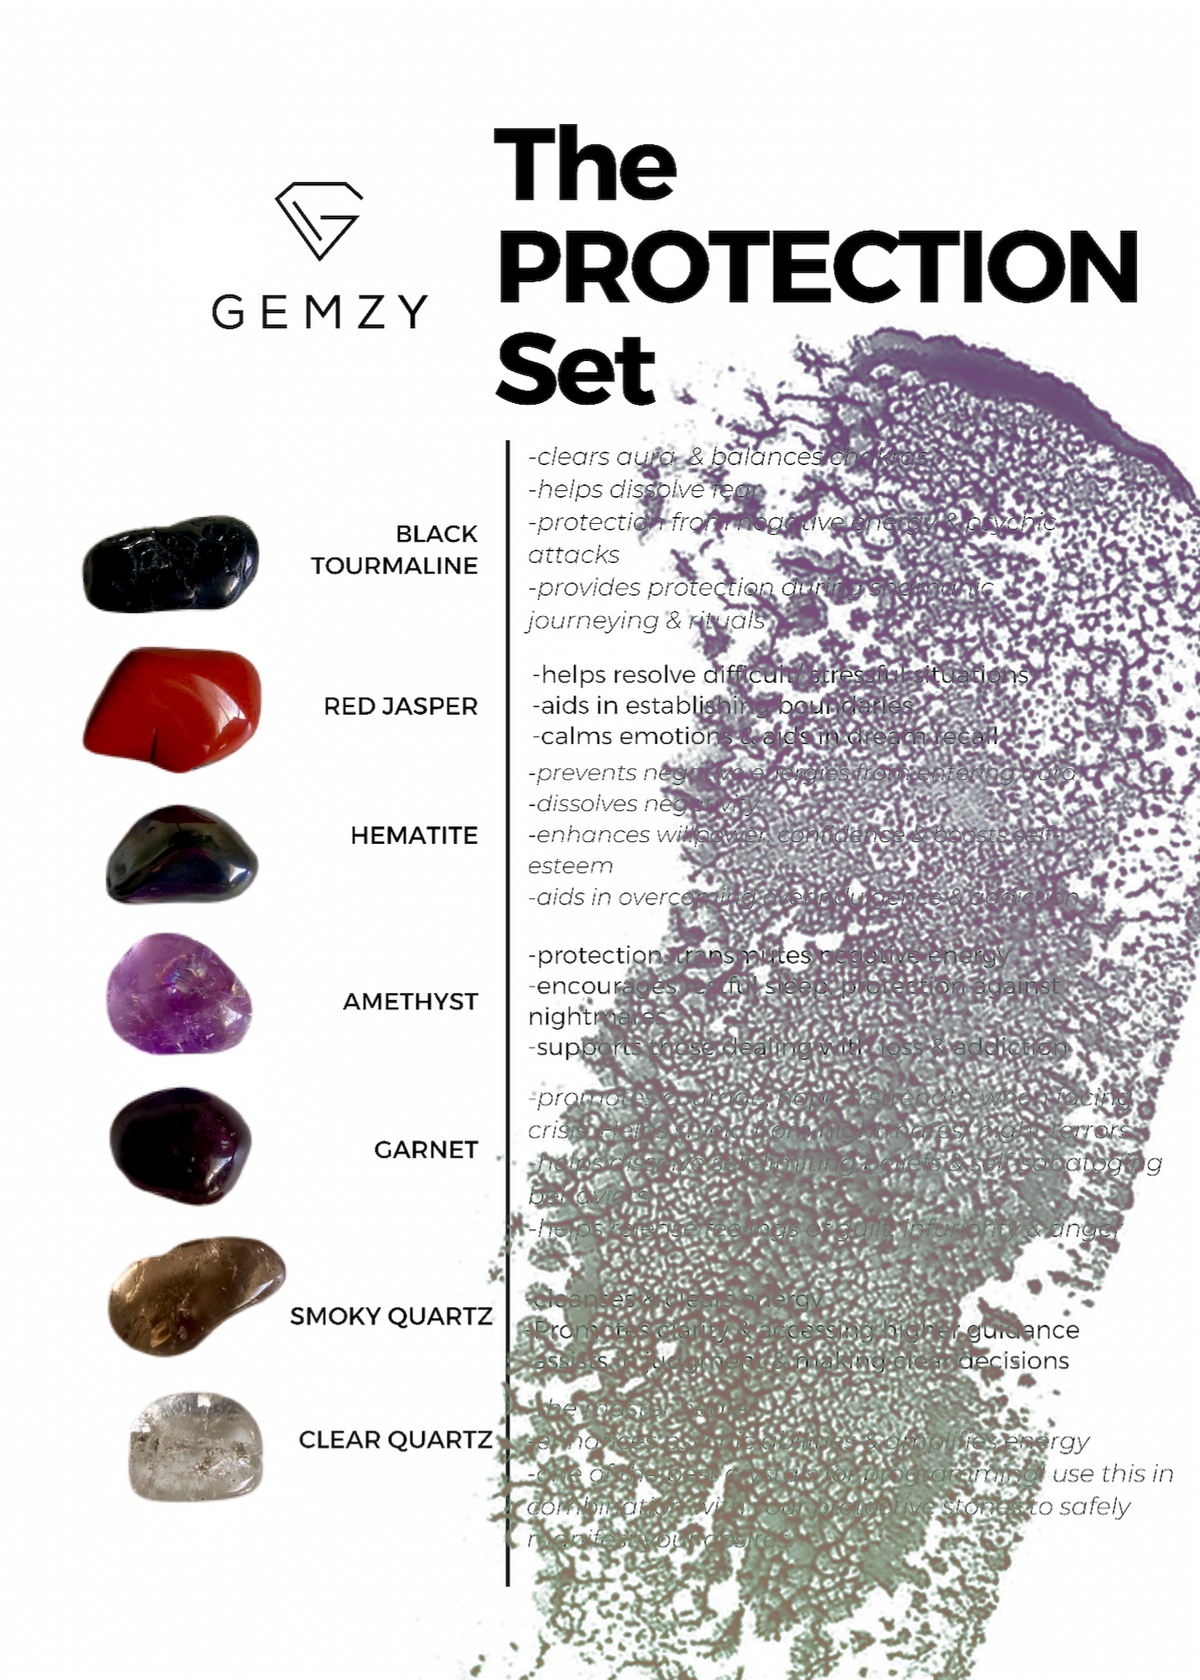 The PROTECTION Set